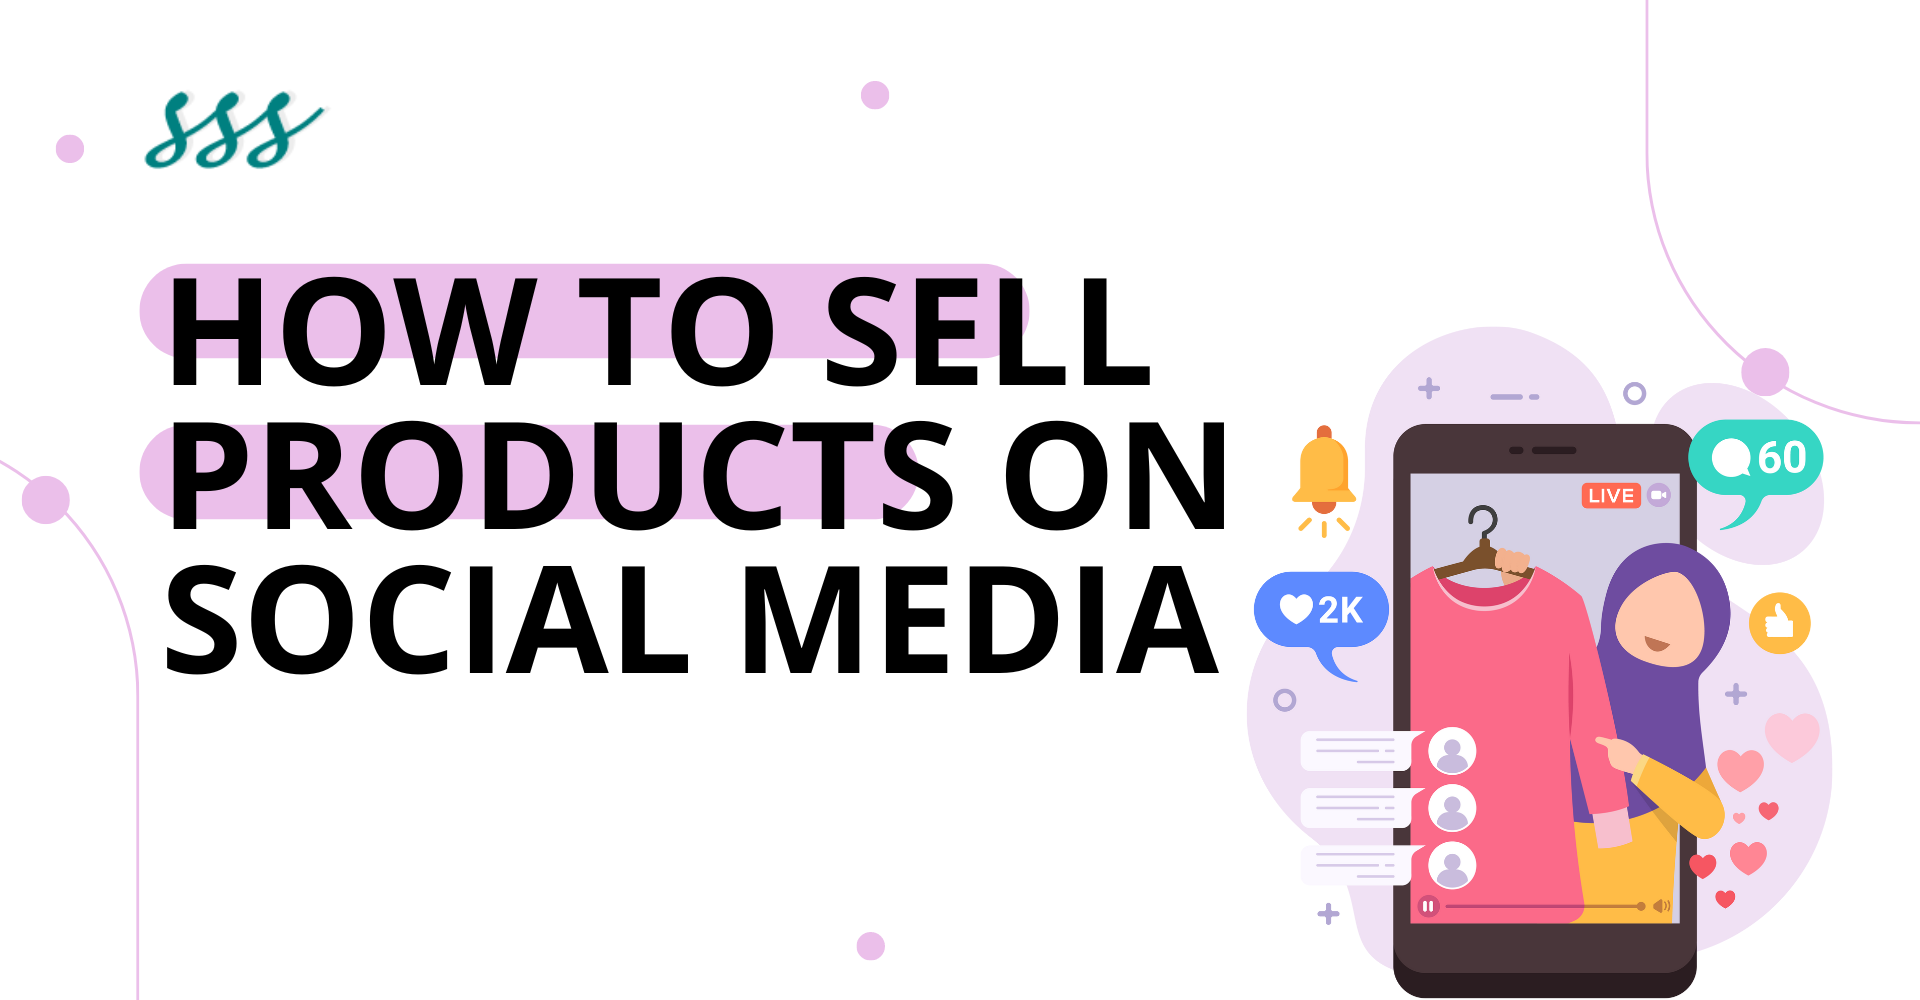 How To Sell Your Products on Social Media